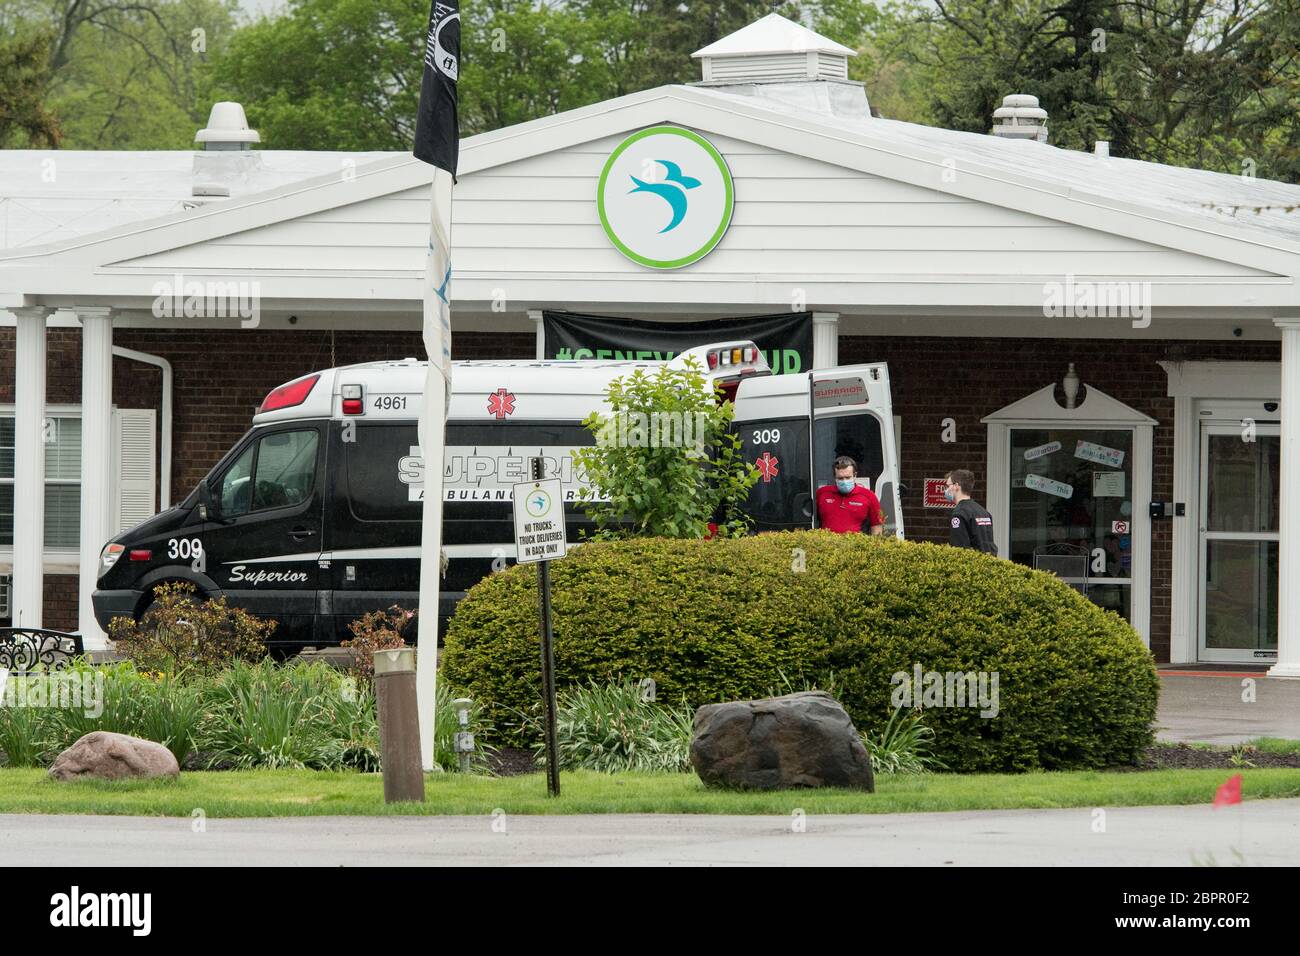 May 17, 2020, Geneva, Illinois, USA: A Superior ambulance prepares to leave Bria of Geneva skilled nursing facility in Geneva, Illinois. The facility has had a quarter of the residents die from COVID-19. As of May 15, there have been 112 positive cases and 22 deaths among residents and staff at the skilled nursing facility. Bria of Geneva ranks near the top of COVID-19 cases and deaths coming from an Illinois nursing home. The nursing home is now being sued by the family of a 97-year-old woman who says they want to hold Bria of Geneva accountable. (Credit Image: © Mark Black/ZUMA Wire) Stock Photo